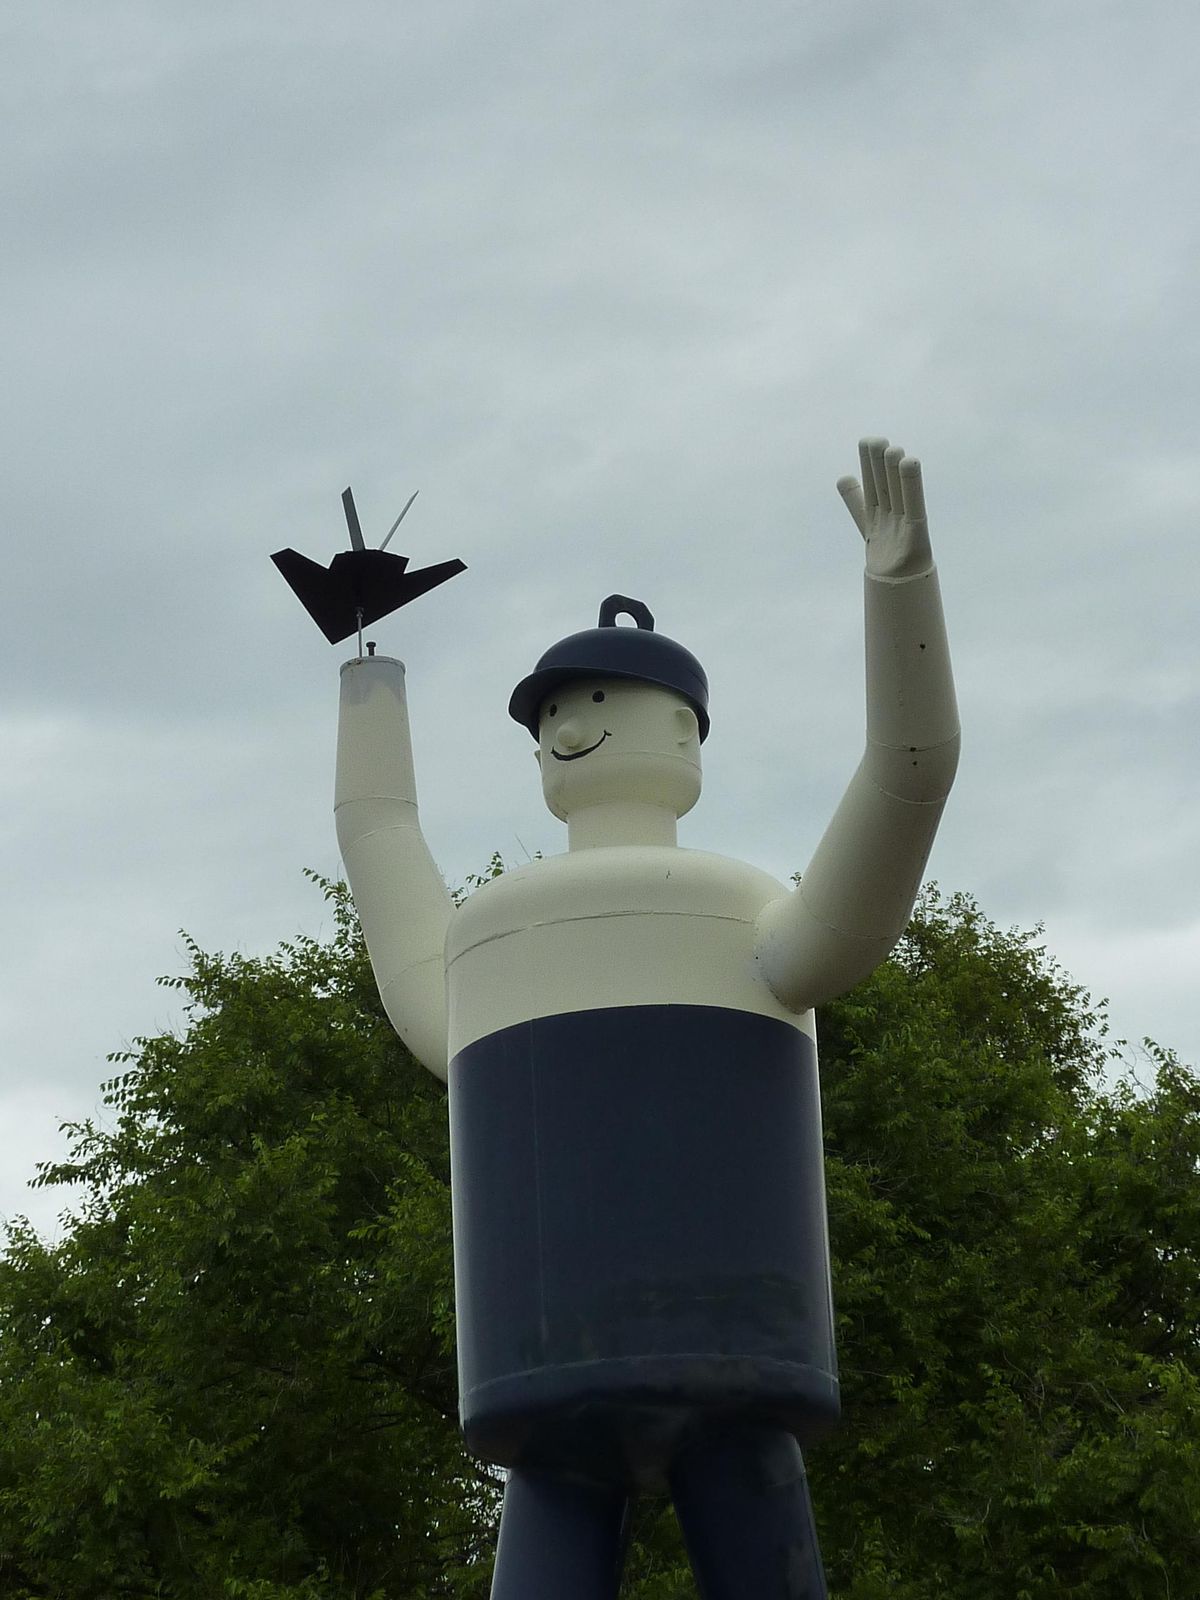 A 16-foot tall steel figure that stands on a pedestal in Spokane’s West Central neighborhood has been fitted with a model of a fighter plane on its right arm. Known as Boris Borzum, the figure is oriented toward the flight path into Spokane International Airport and Fairchild Air Force Base.